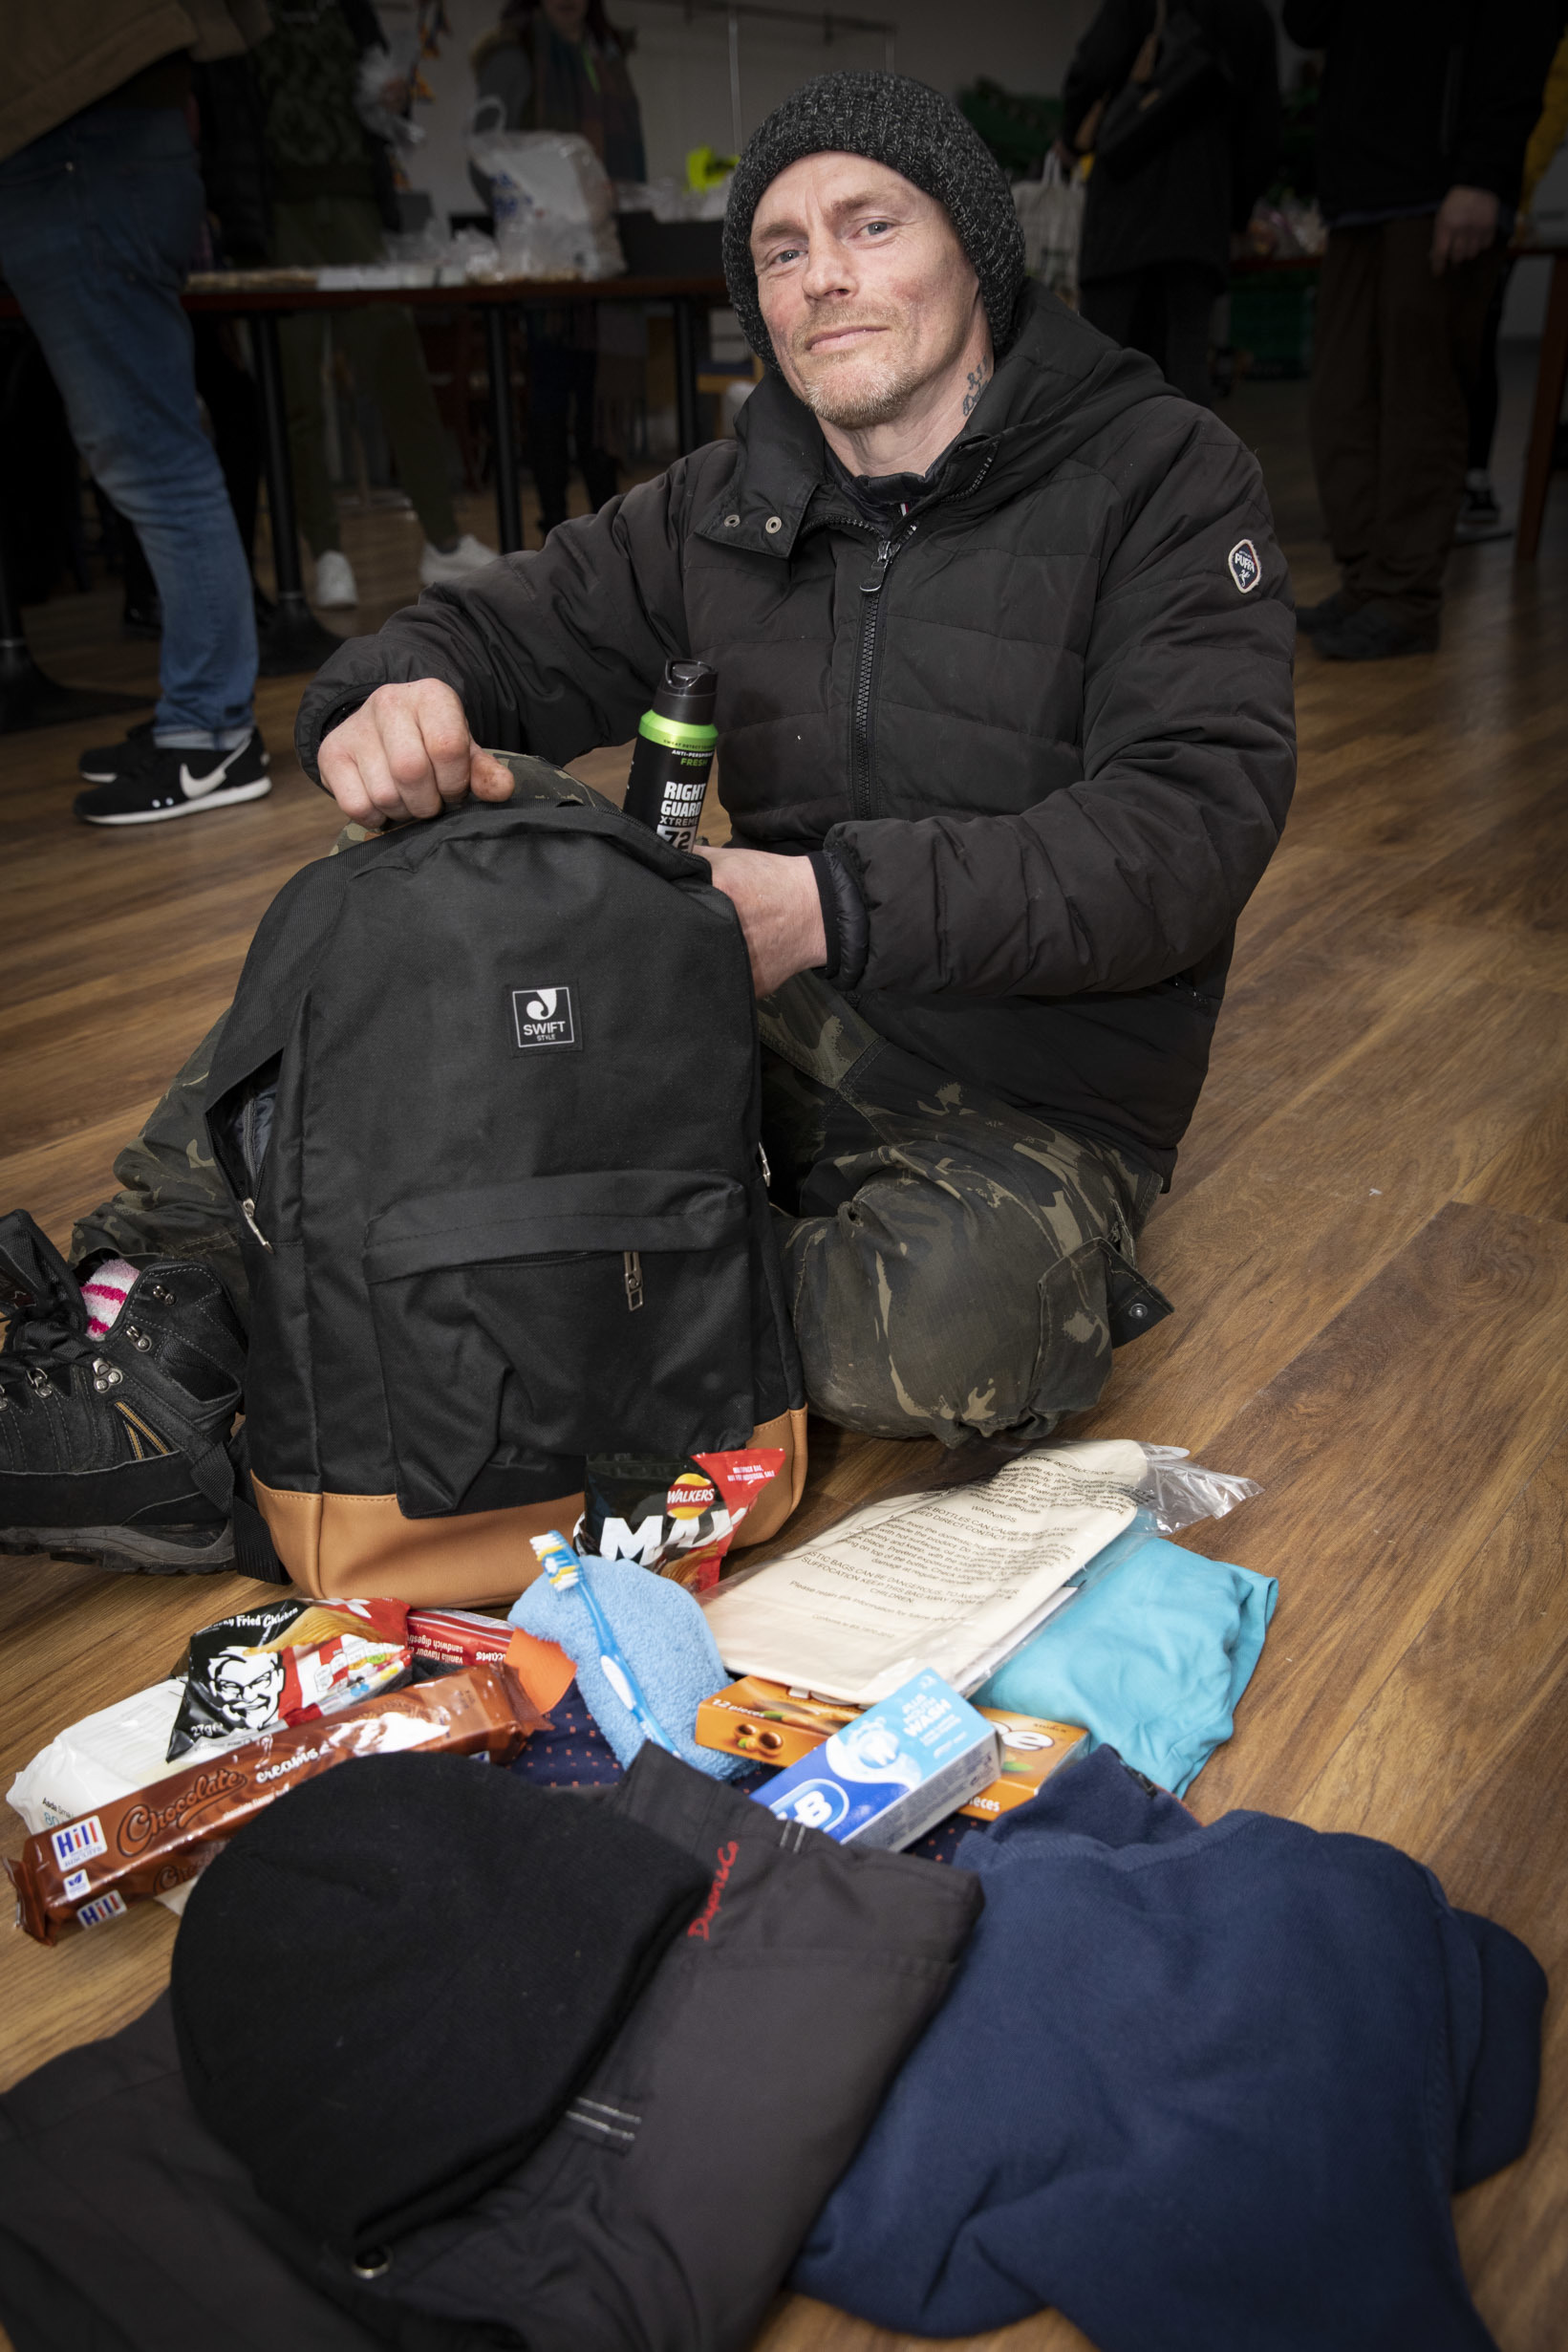 Hadlow Edwards donation to help homeless people. Pictured is service user Steve Edwards who received one of the rucksacks containing donations. Picture Mandy Jones